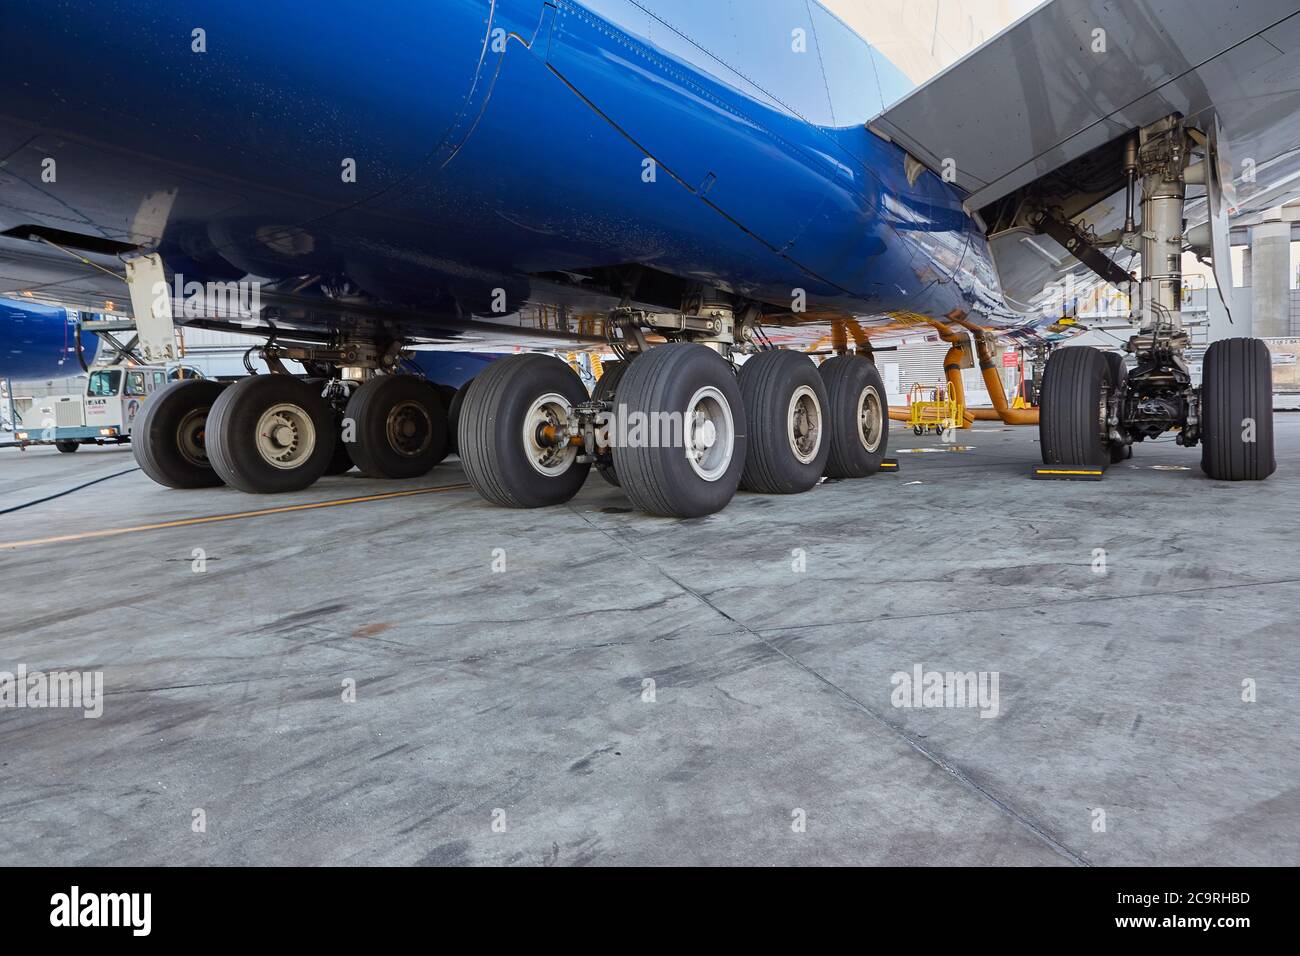 The Undercarriage (Landing Gear) Of A British Airways Airbus A380 On The Ground At San Francisco International Airport, California, USA. Stock Photo